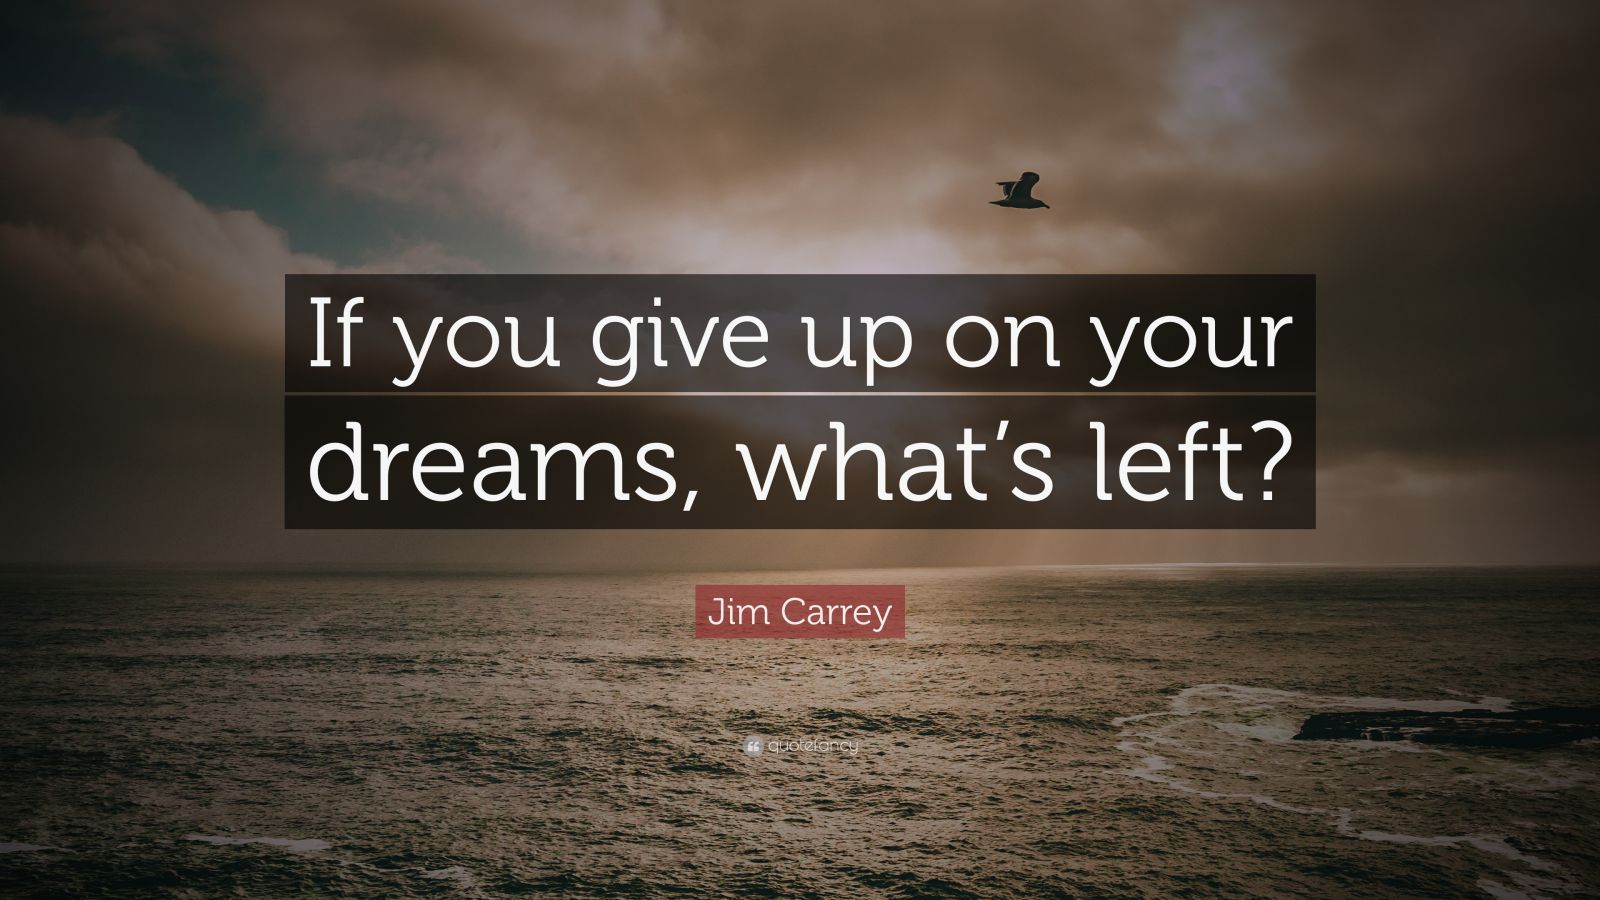 Jim Carrey Quote: “If you give up on your dreams, what’s left?” (9 ...